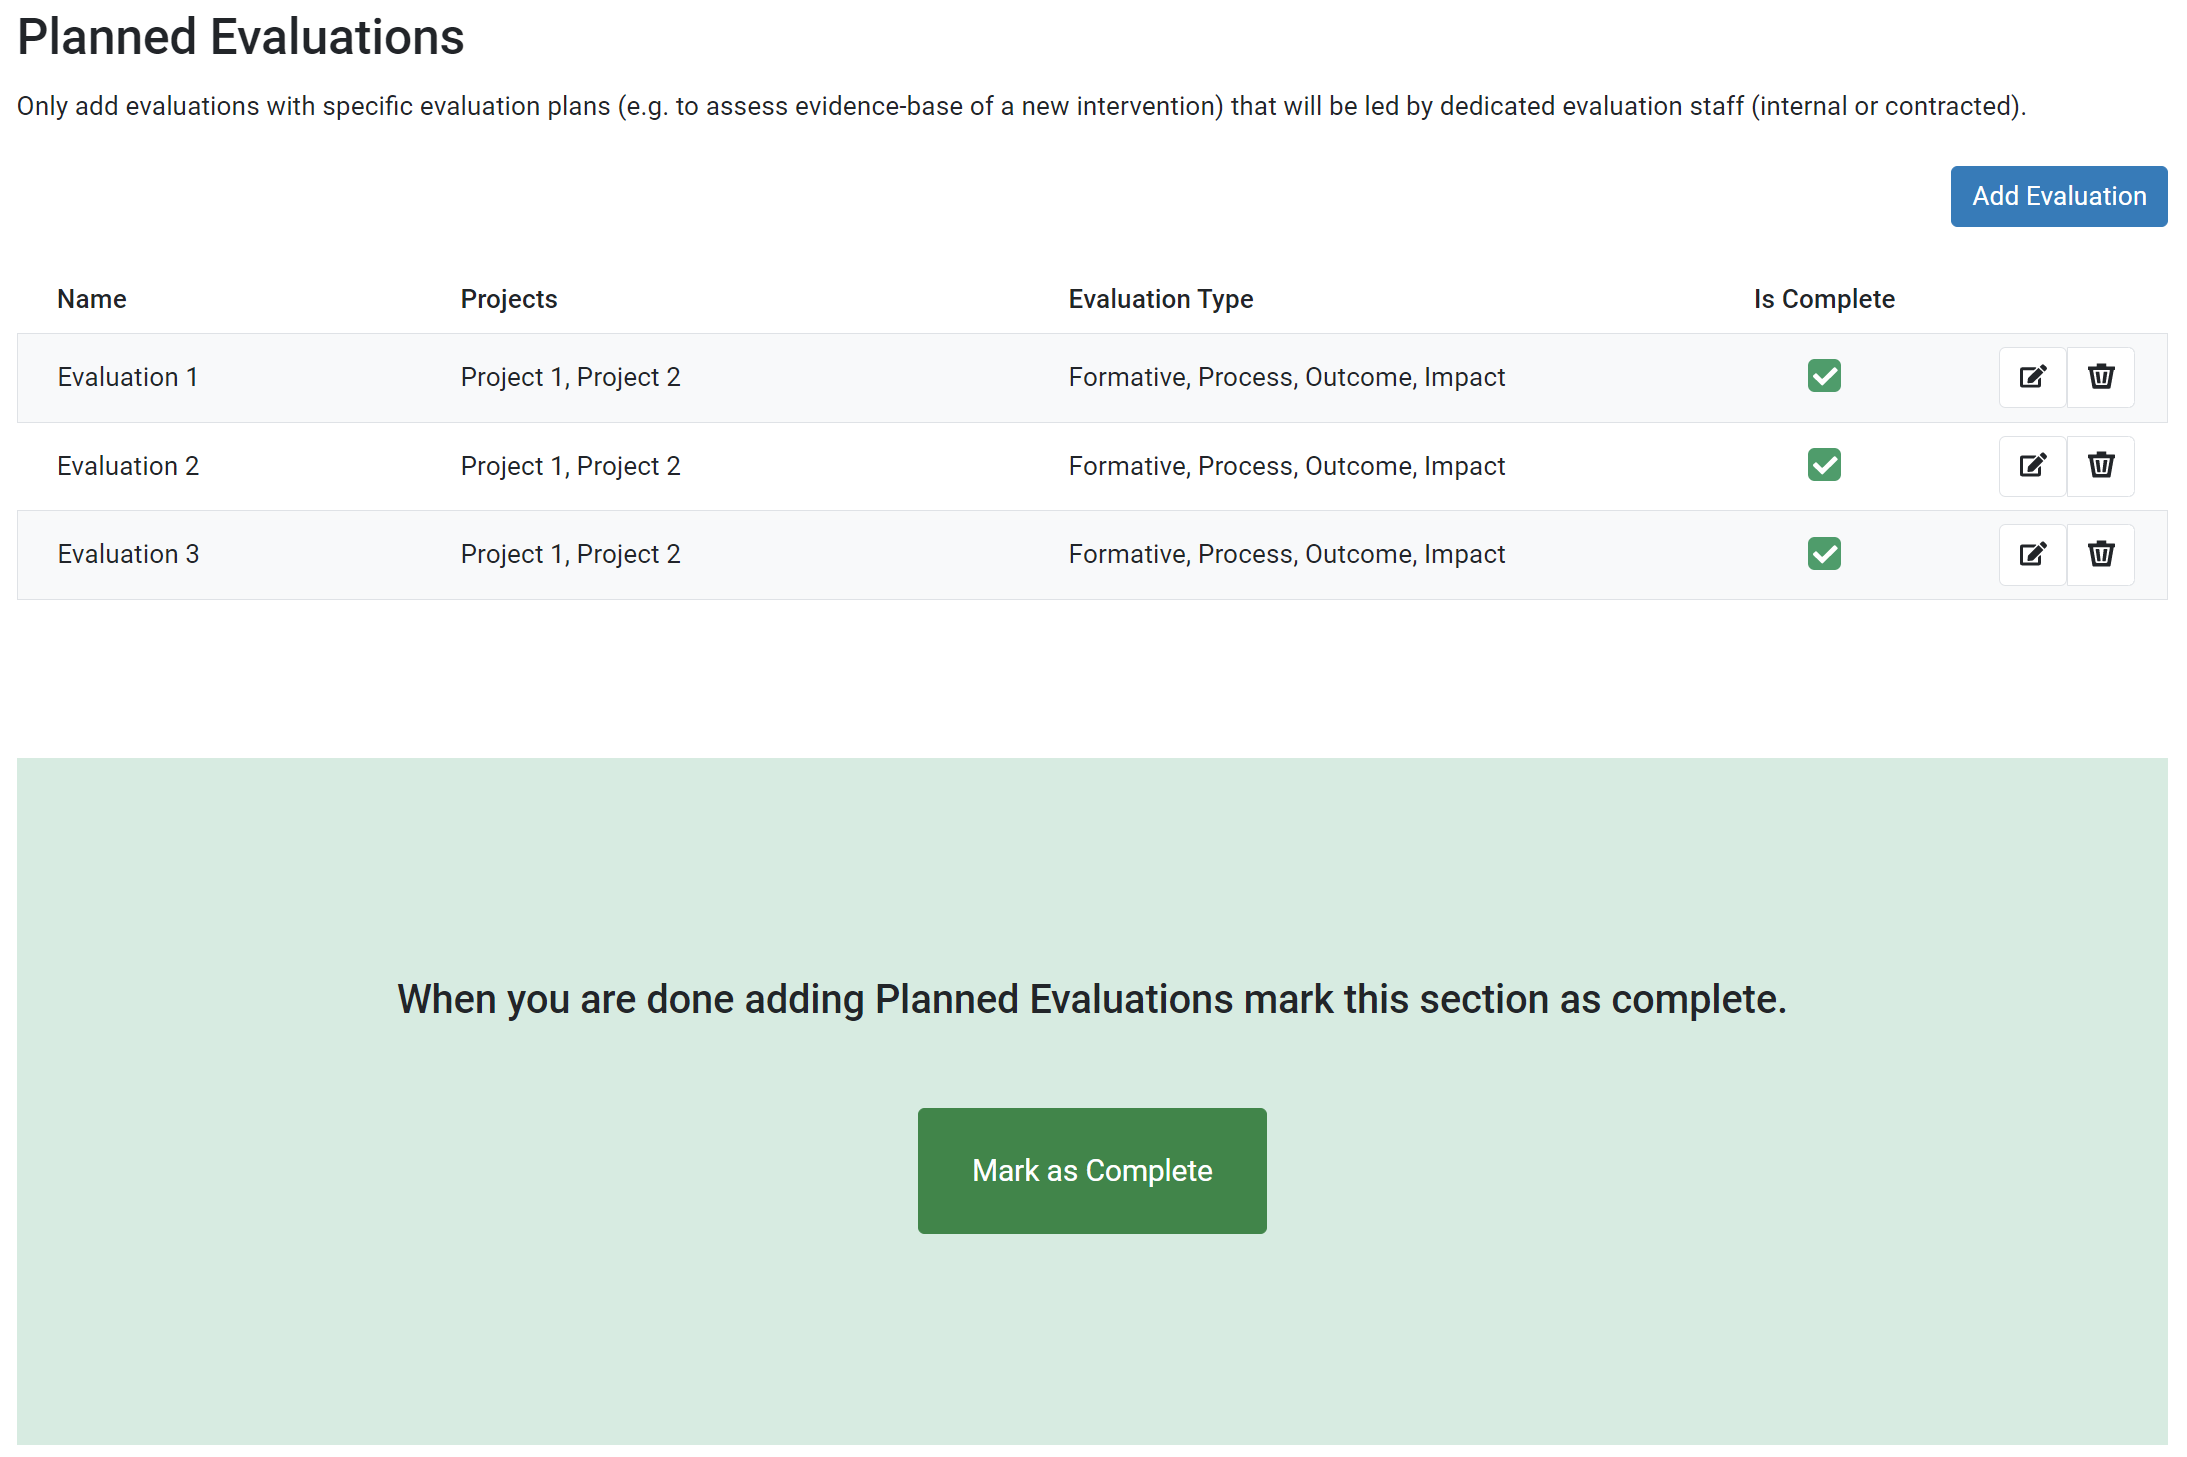 Planned Evaluations Mark as Complete Button